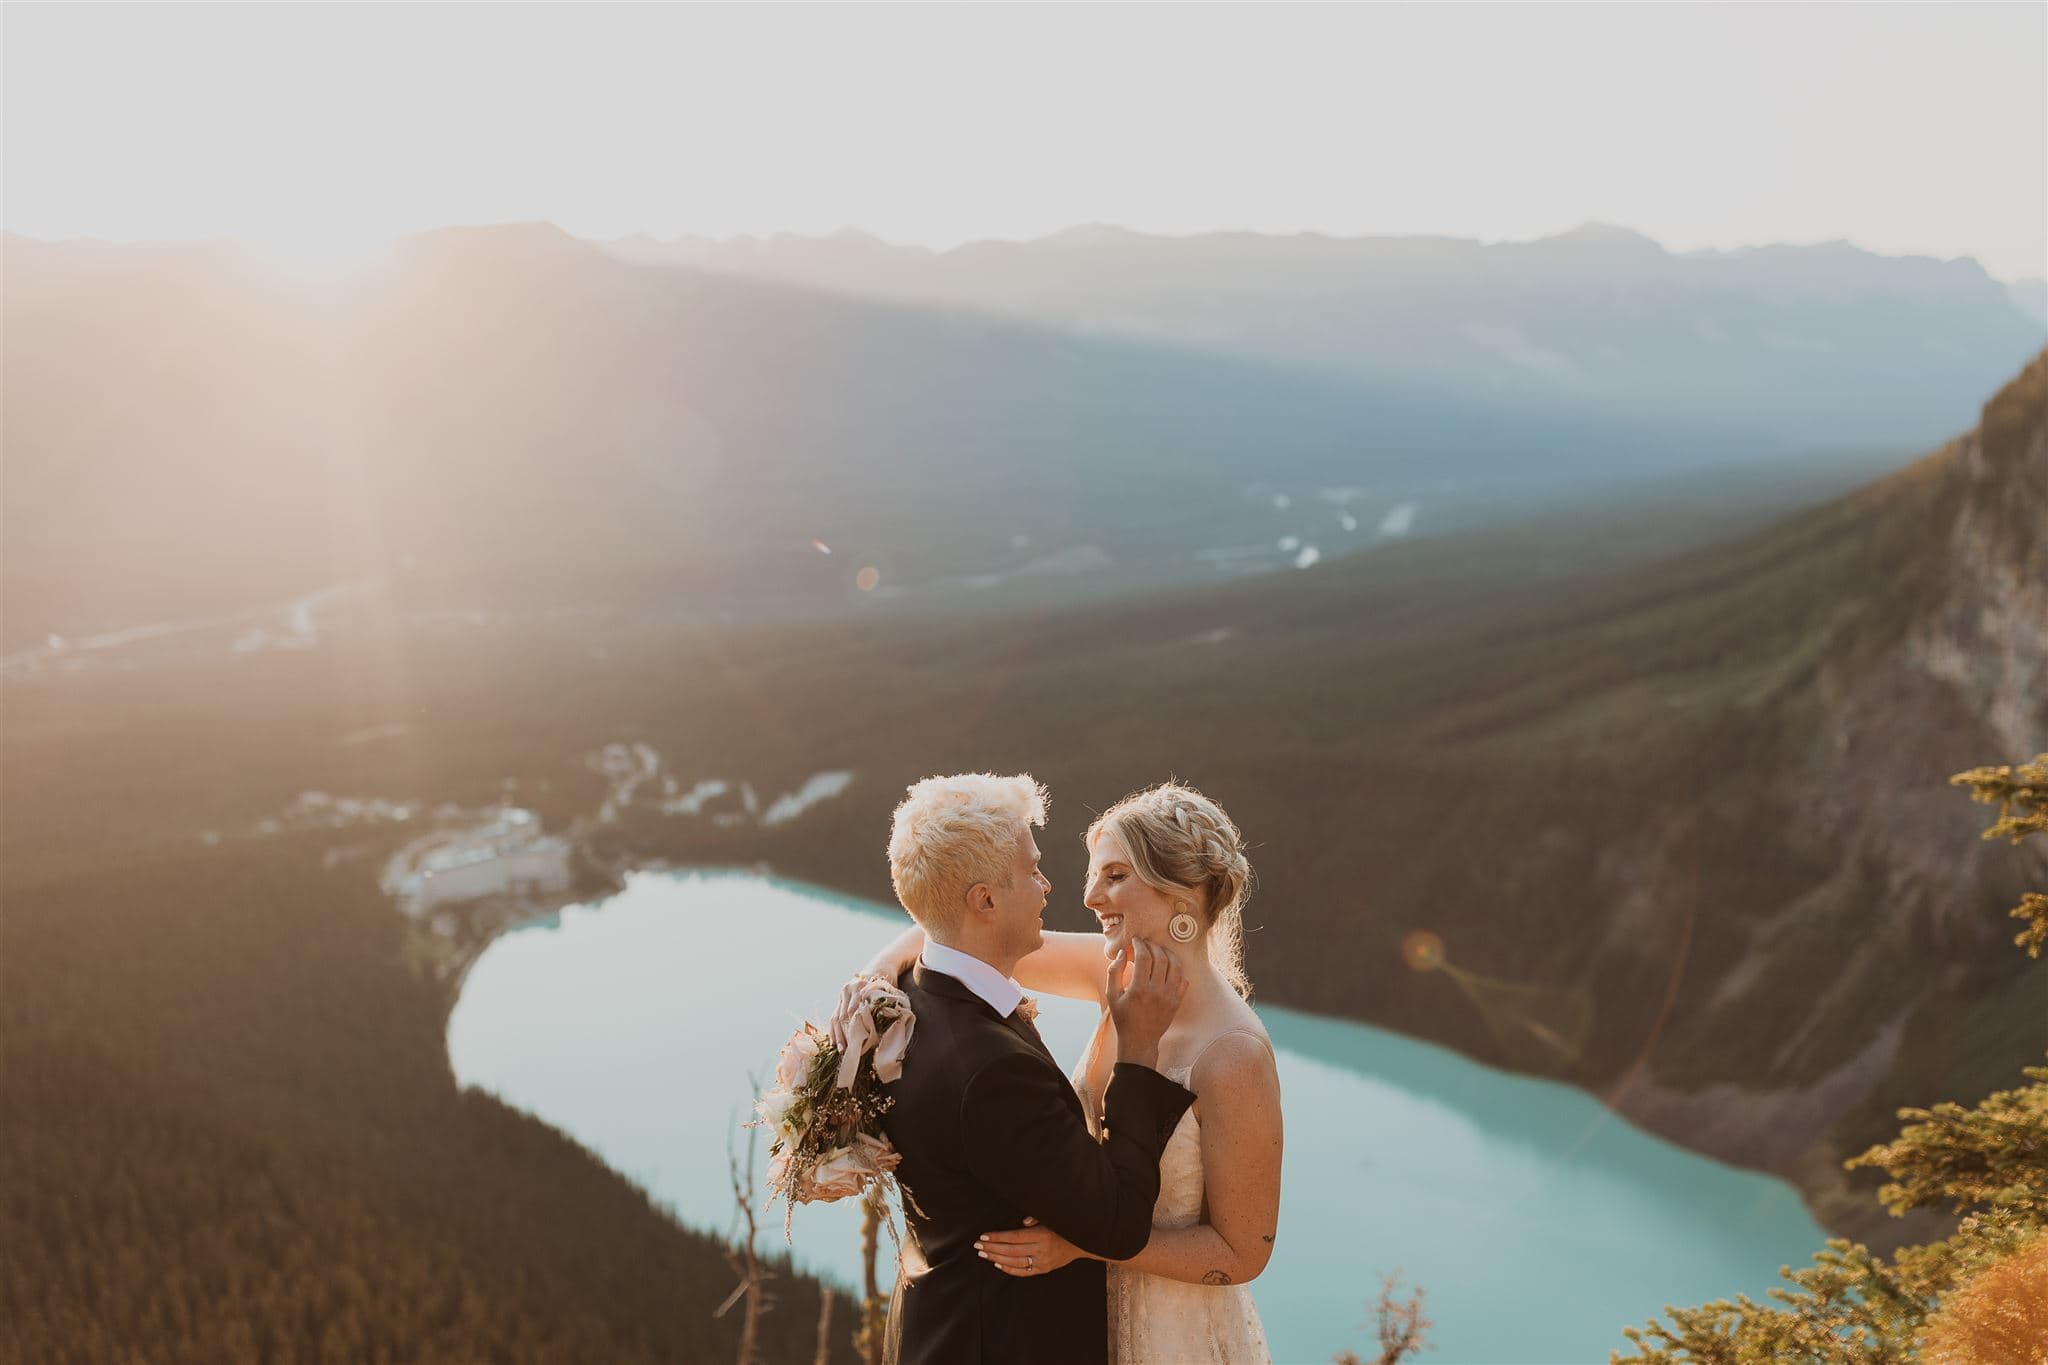 Romance and Adventure: 30 Incredible Elopement Ideas You'll Love